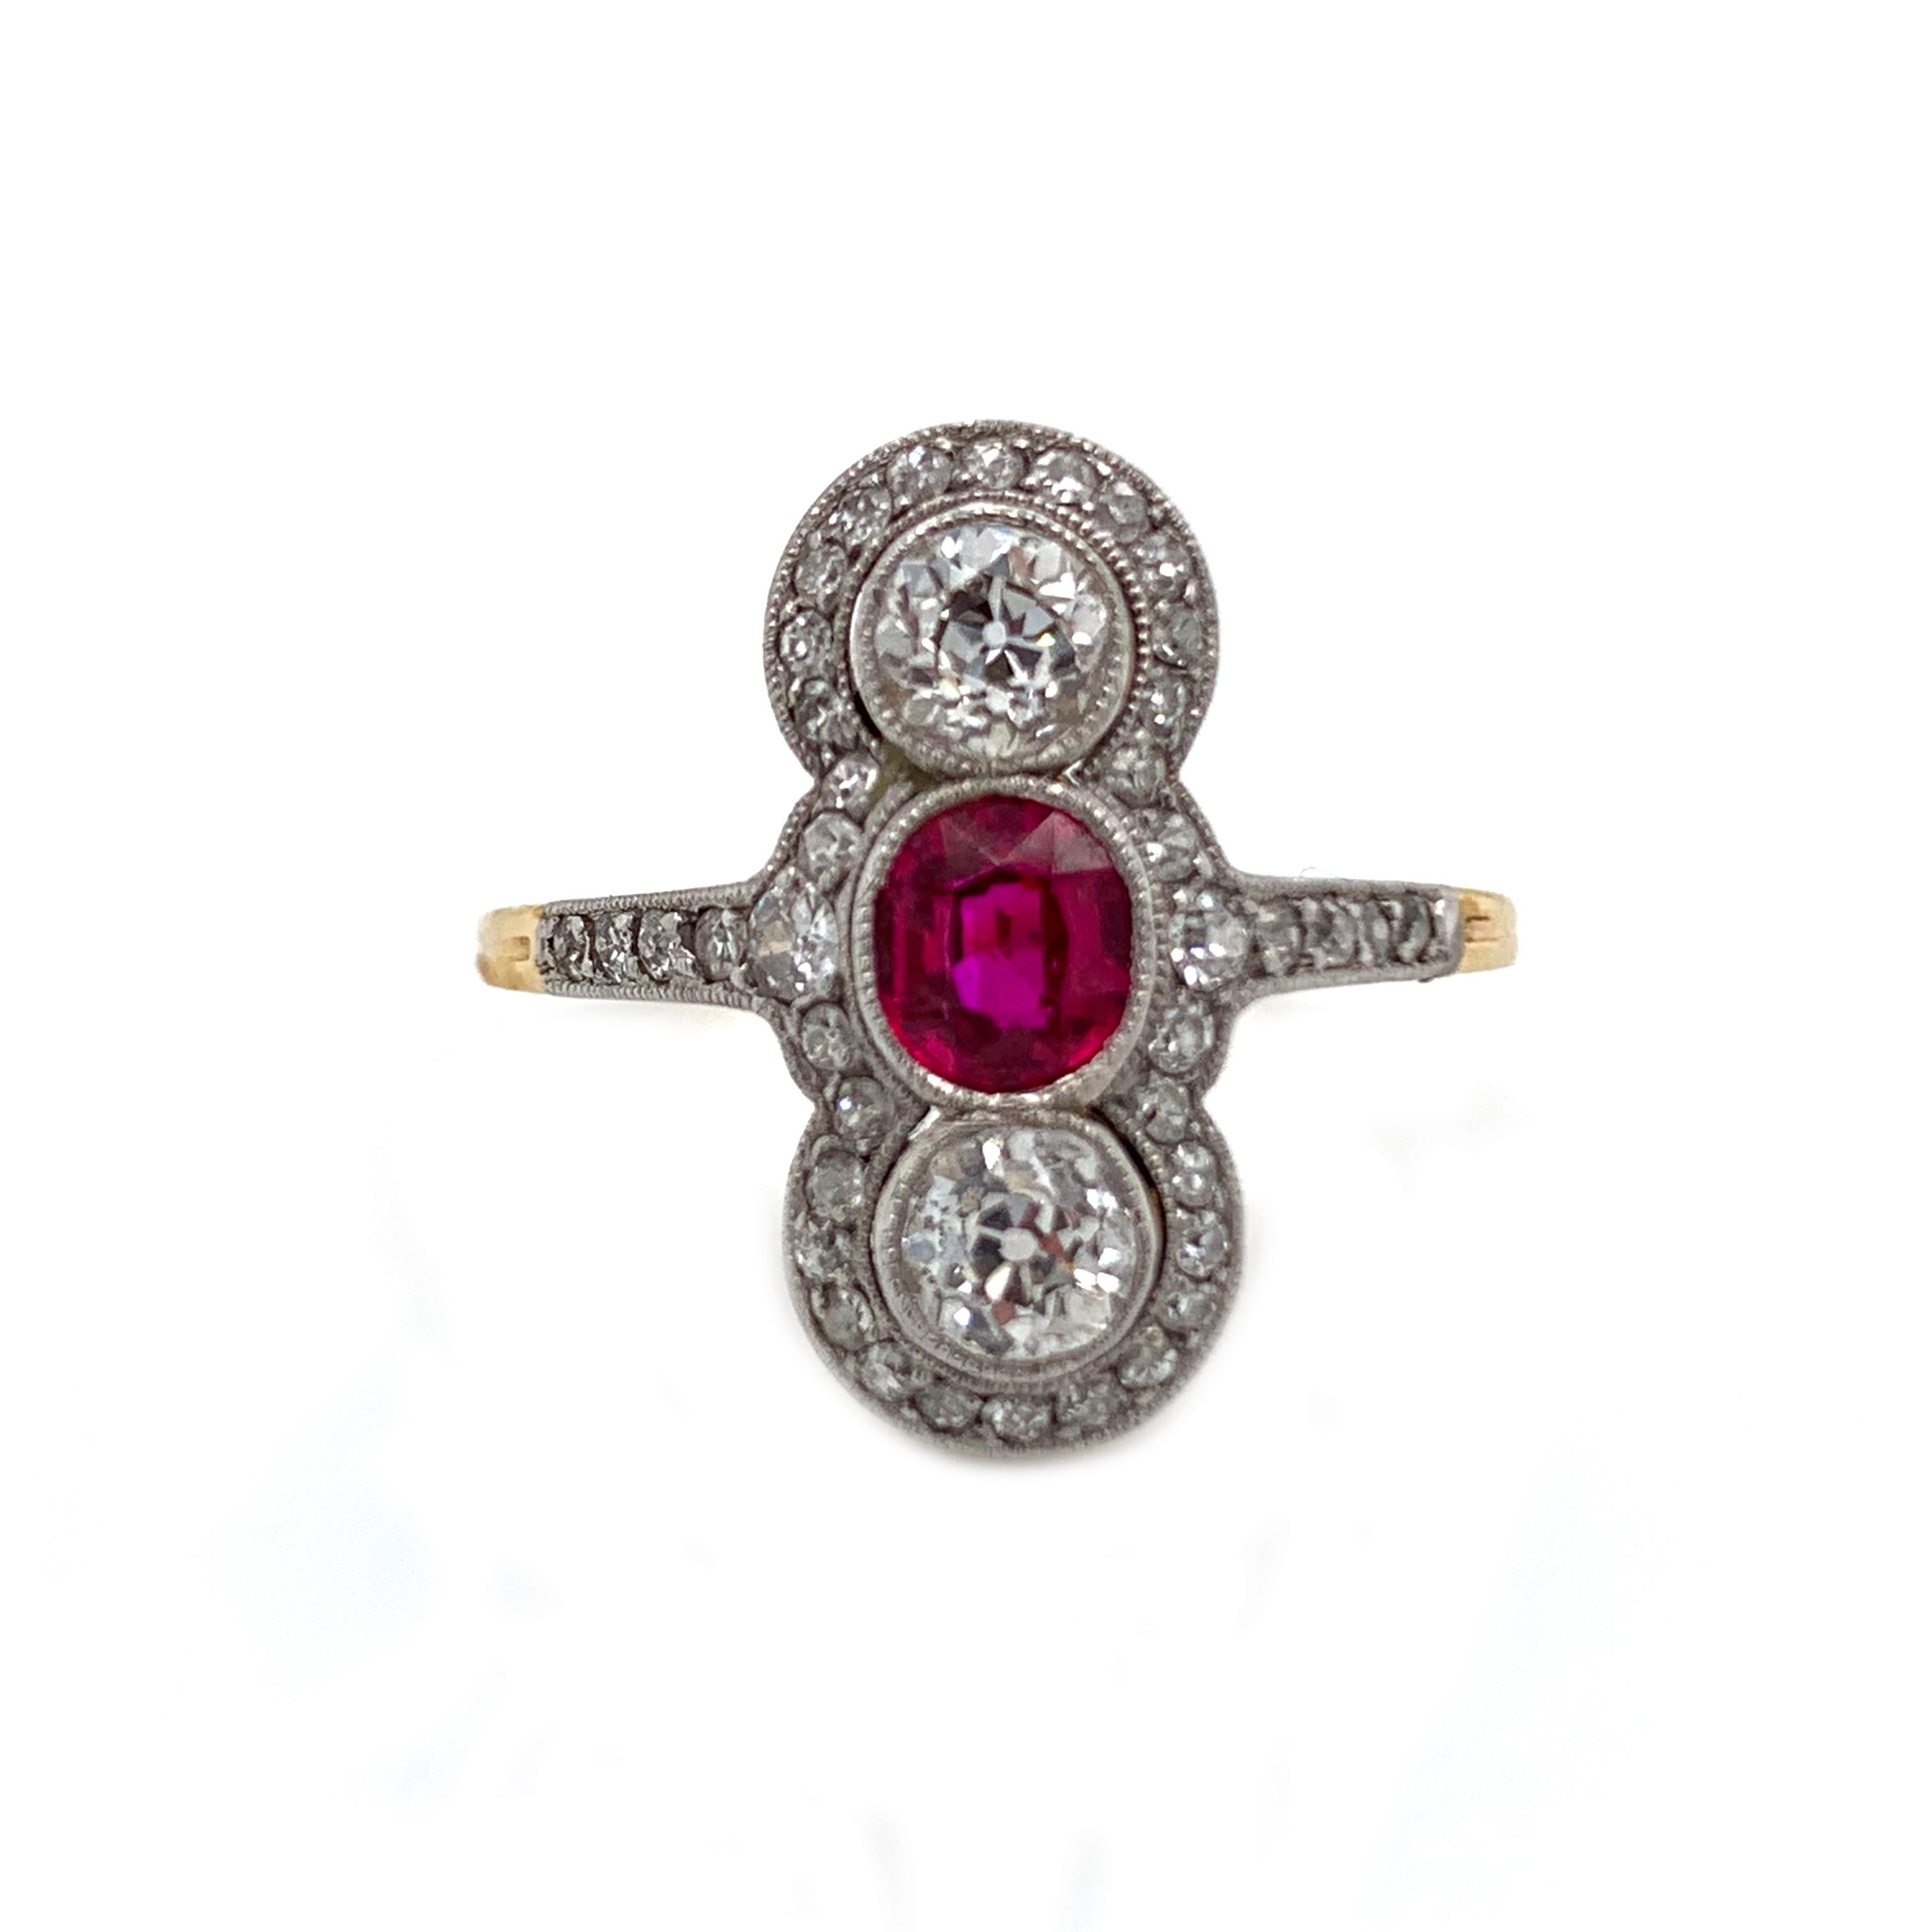 We, have this elegant Edwardian style Platinum Ruby and Diamond gorgeous ring in a US size 8. This, beautiful ring comes with a SSEF certificate for the Burma No Heat Ruby. The ring weigh 4.2 grams and feature a beautiful bright yellow gold finish